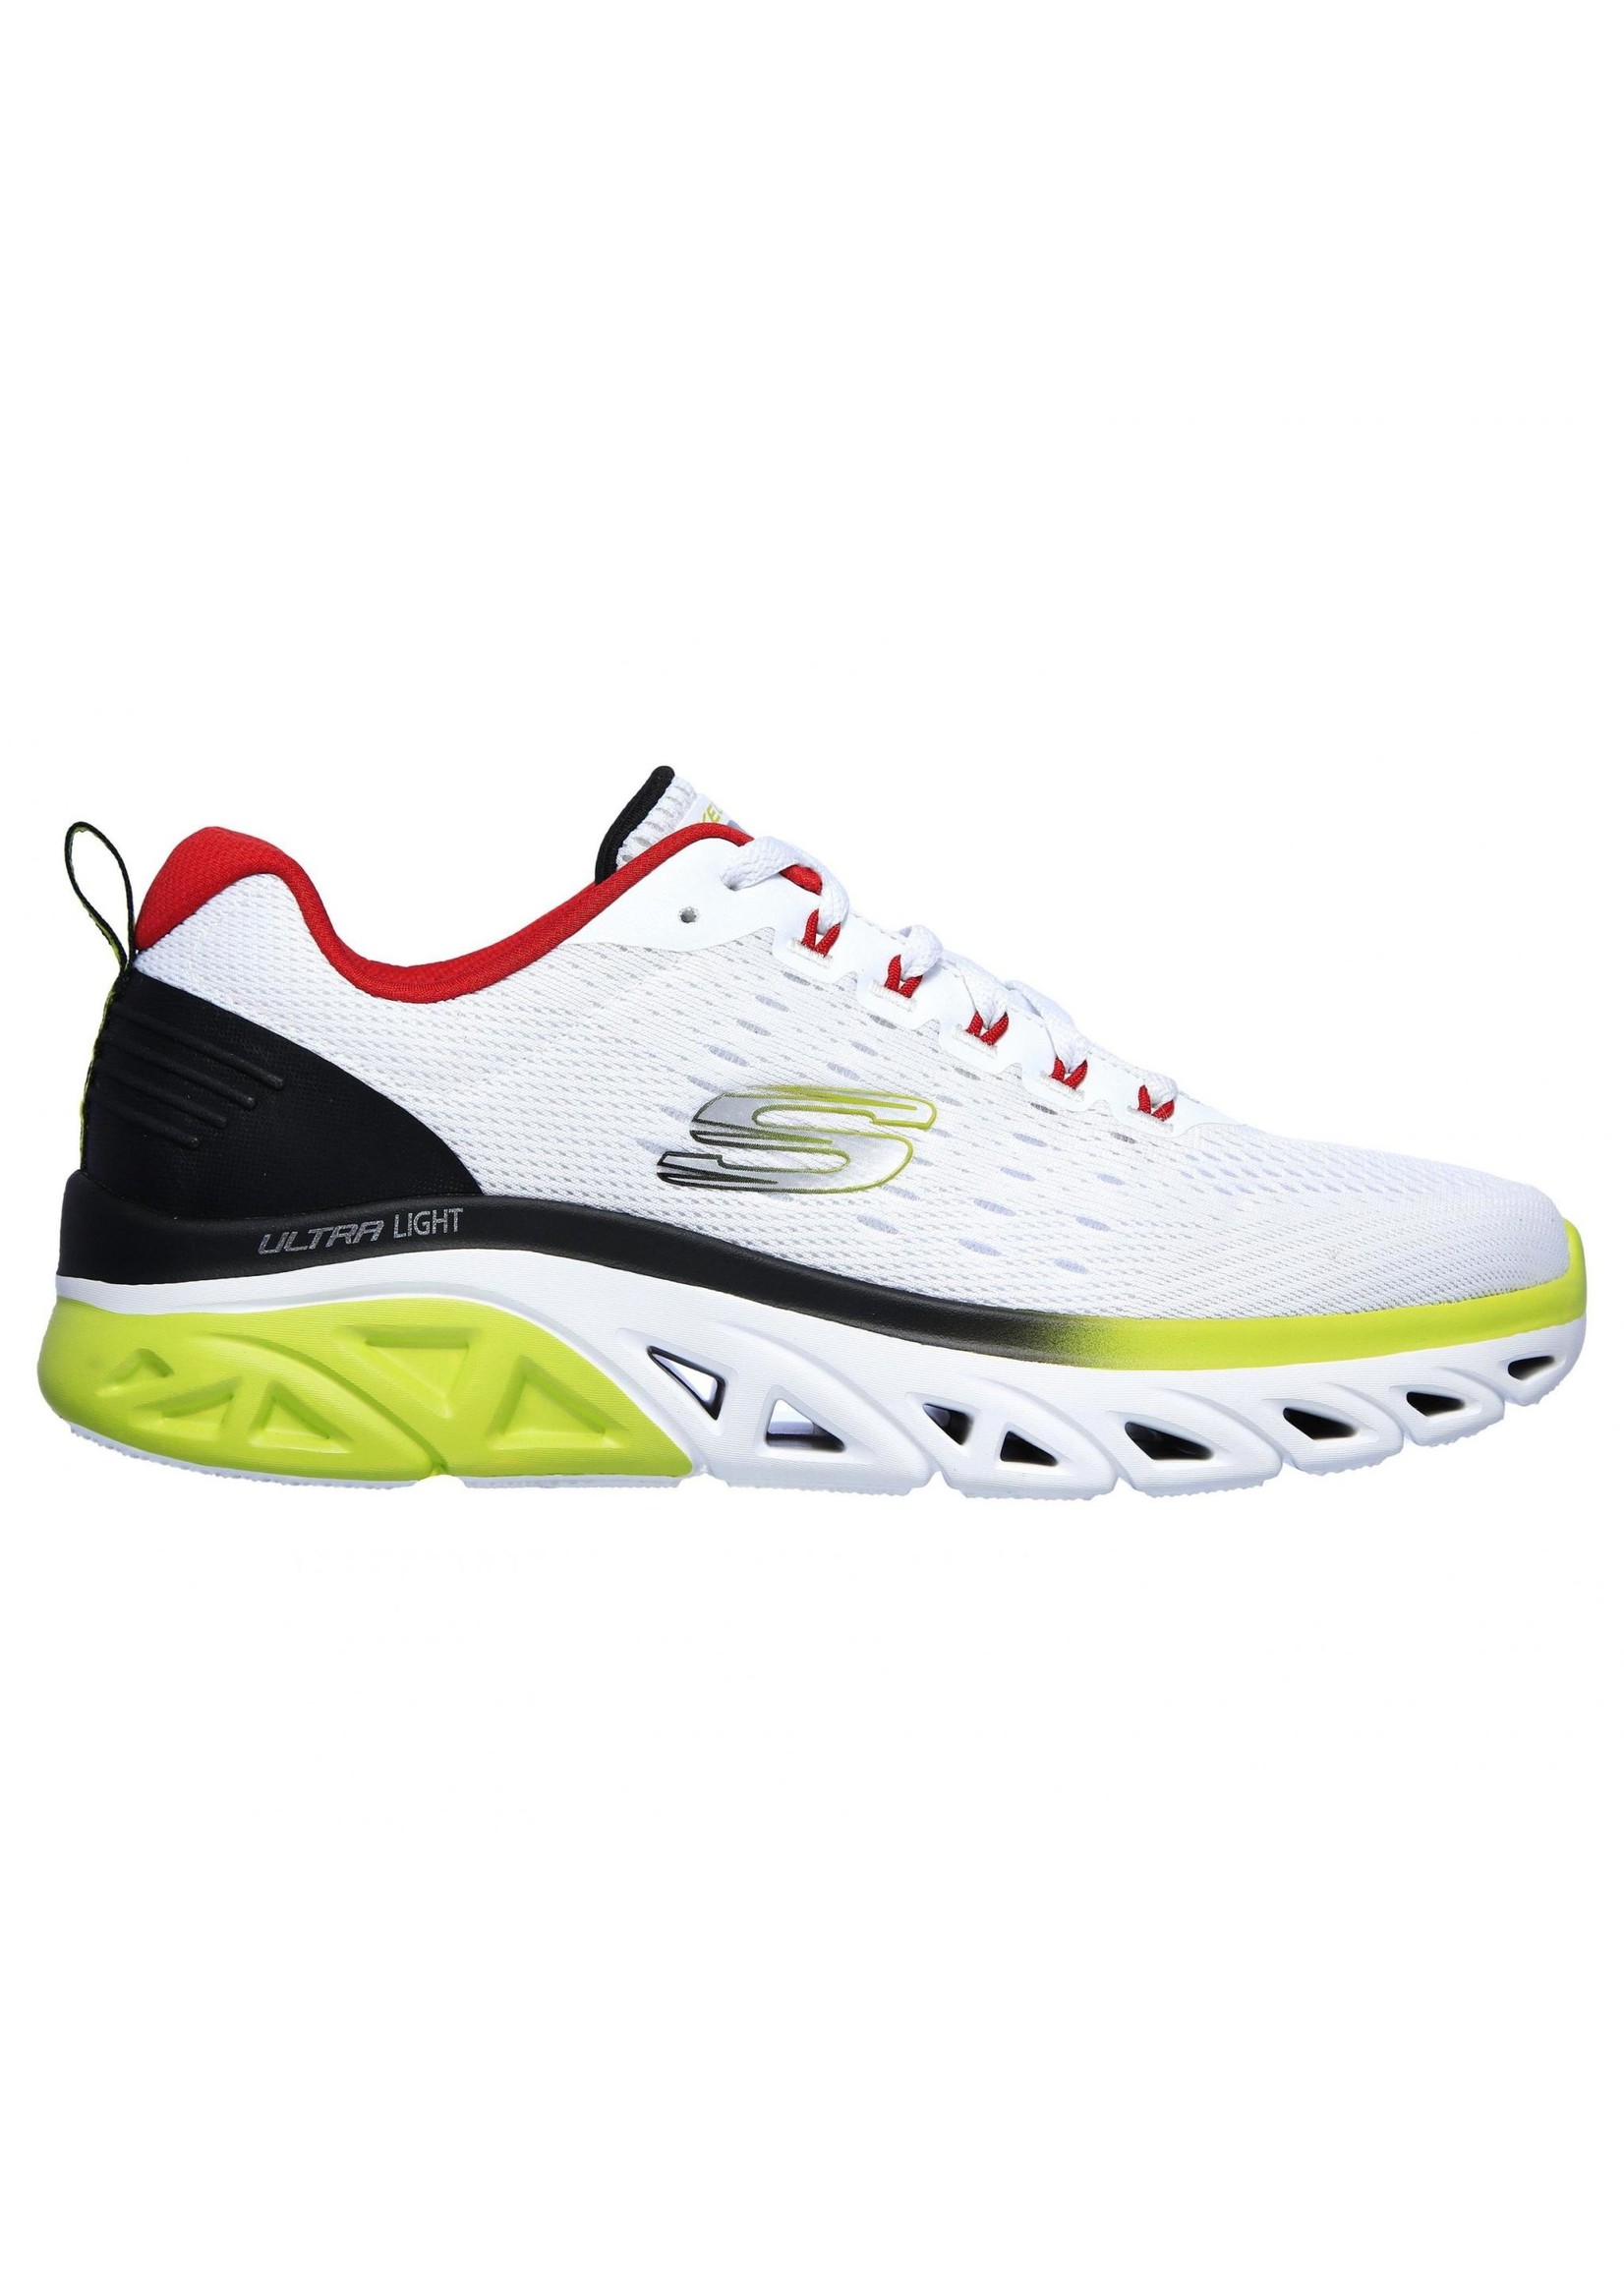 Skechers Sport Glide-Step Sport-New Appeal Men's Sneaker White-Multi - SHOE  PLUS - Low Prices - Express Shipping - 100s of Items to Choose From!